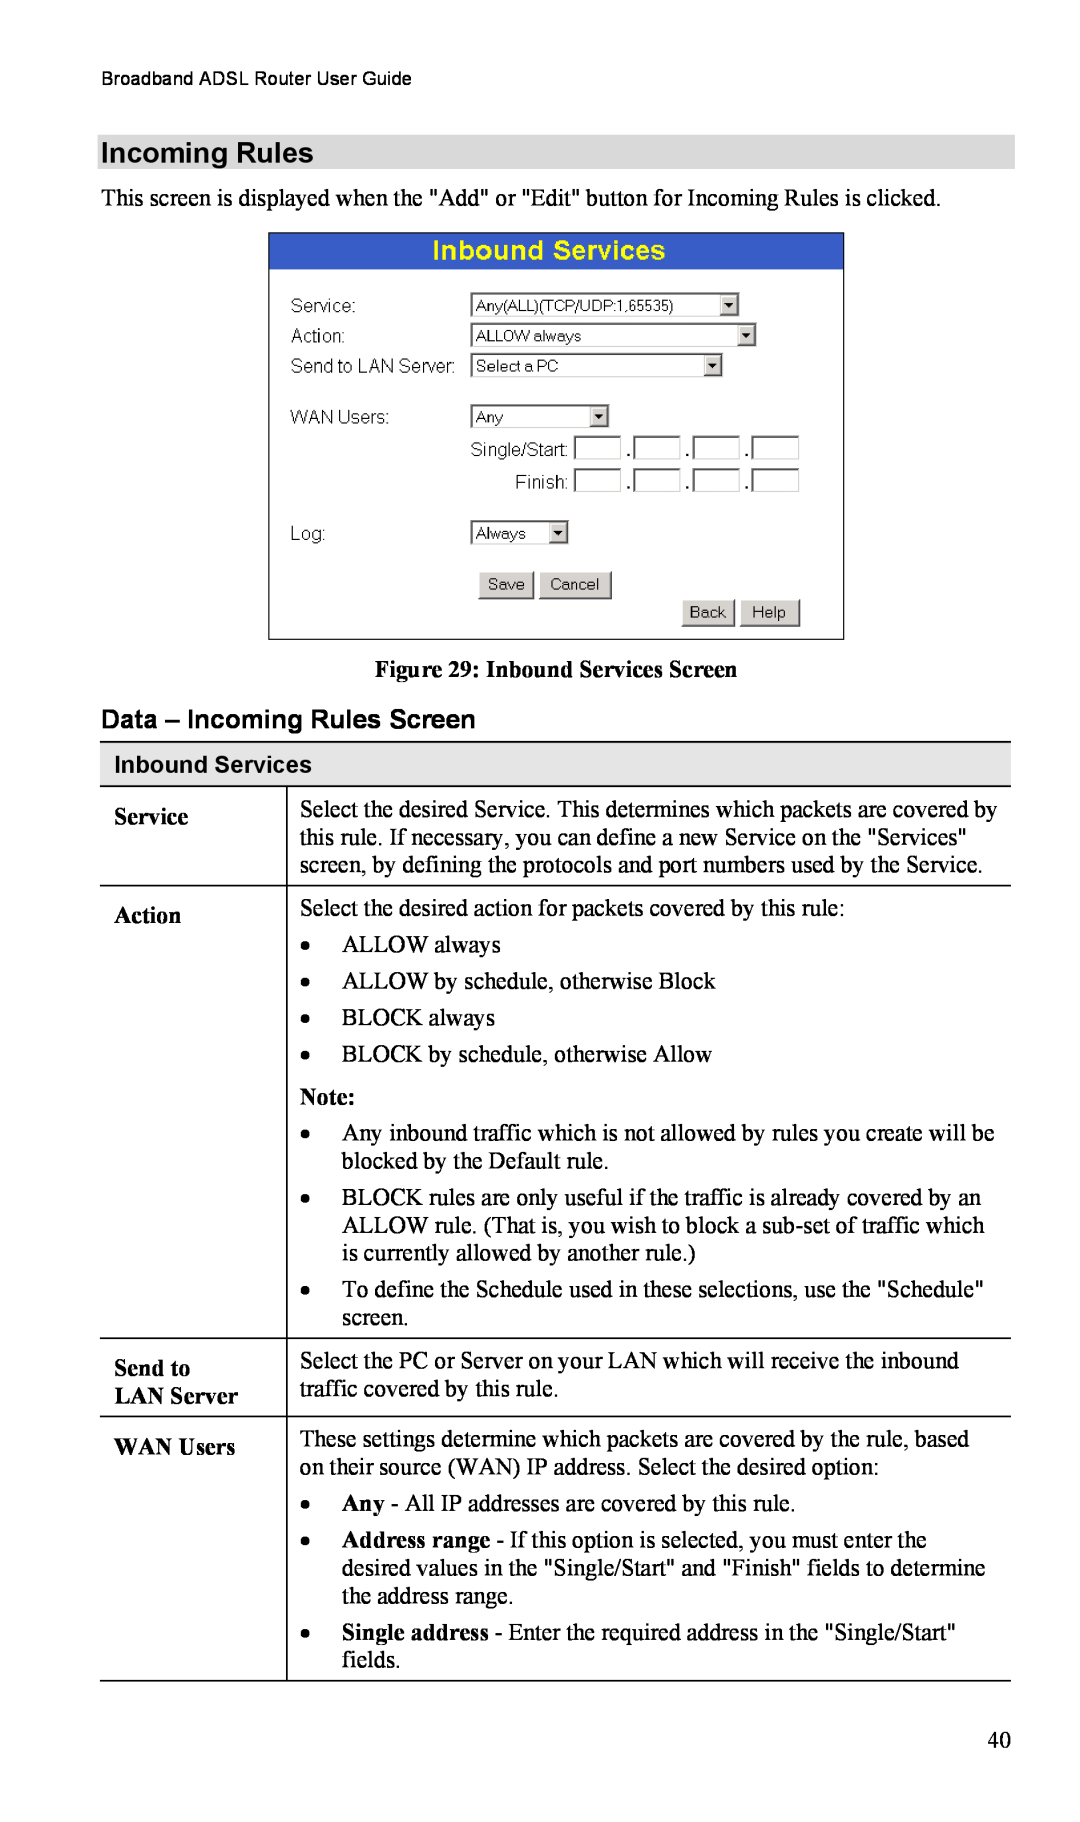 TRENDnet TW100-BRM504 manual Data - Incoming Rules Screen, Inbound Services 